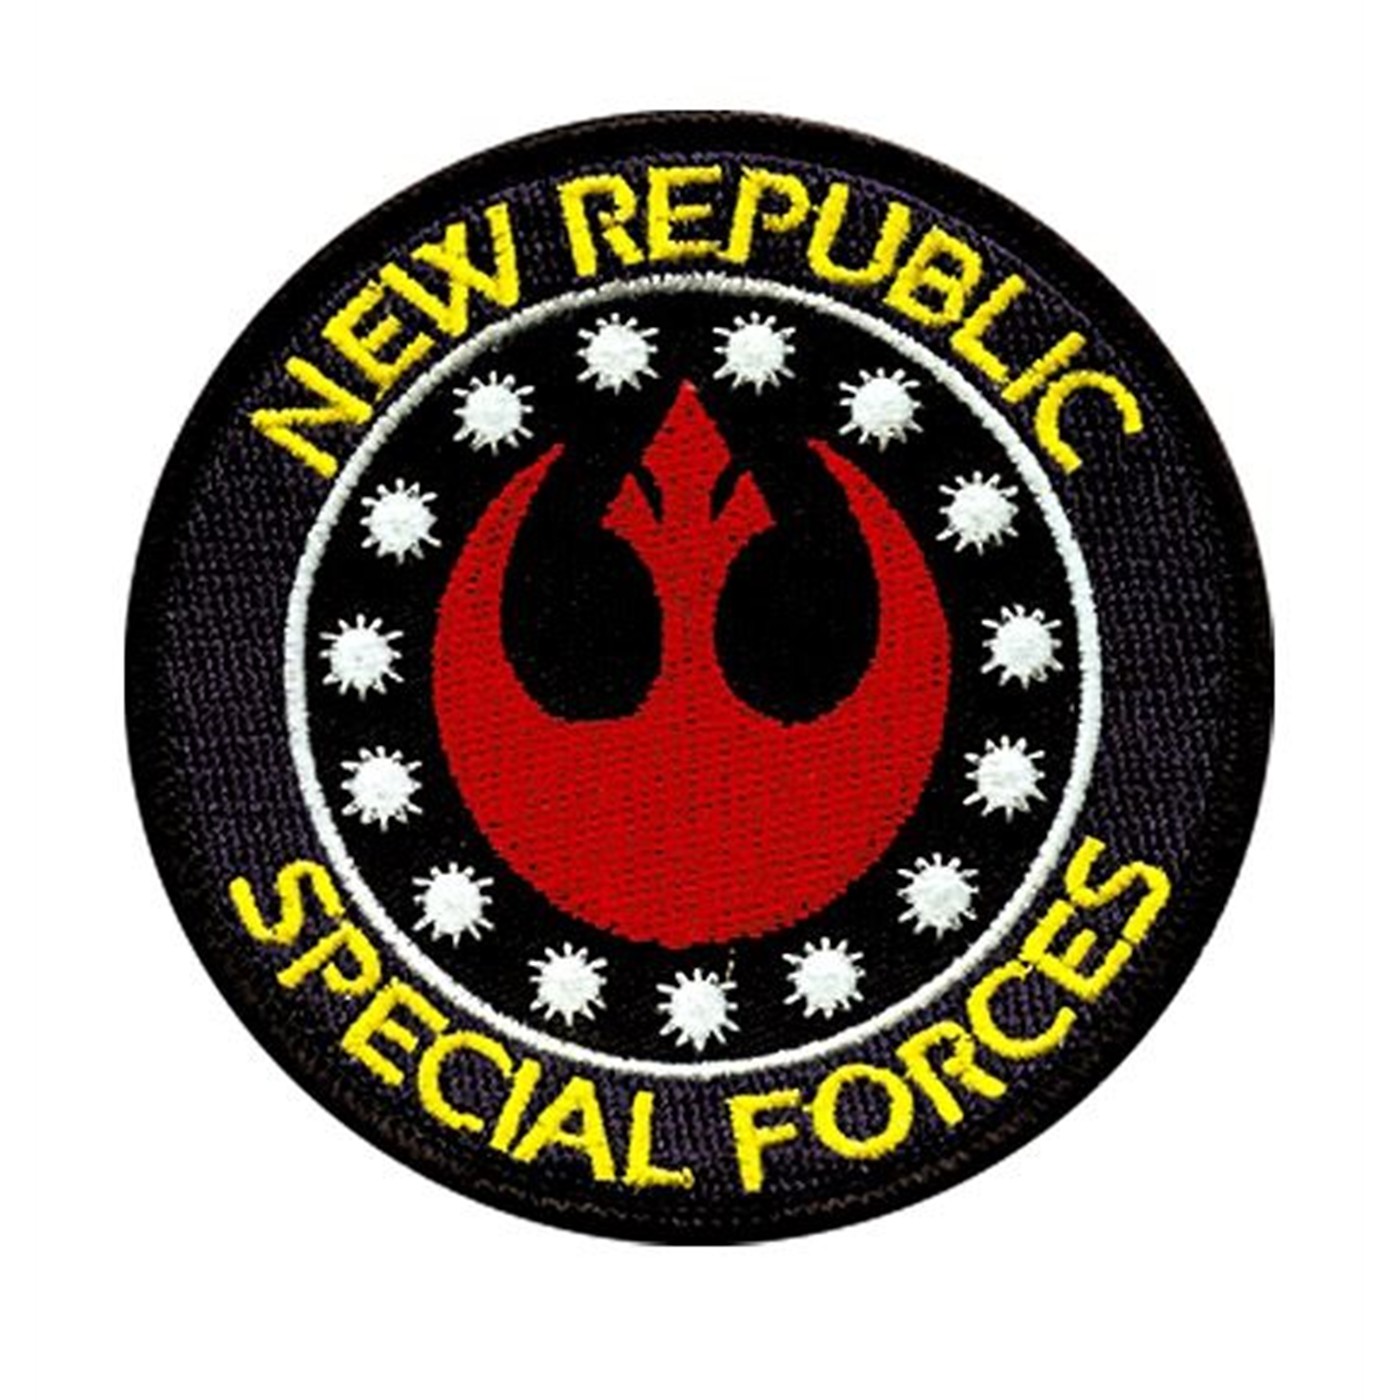 Star Wars New Republic Special Forces Patch